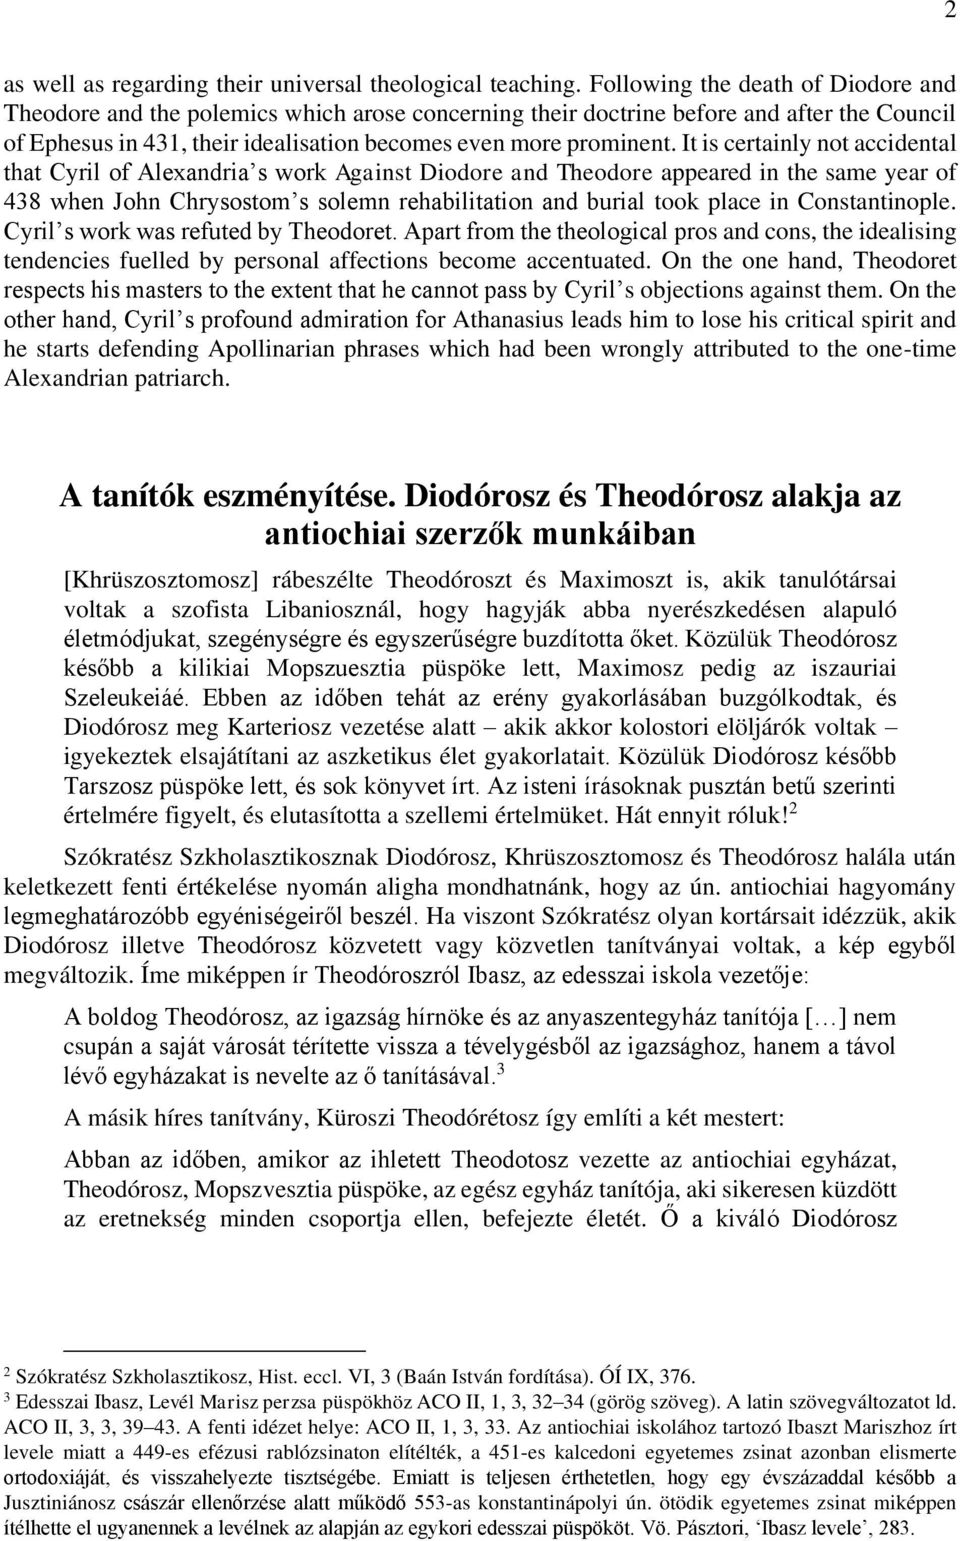 It is certainly not accidental that Cyril of Alexandria s work Against Diodore and Theodore appeared in the same year of 438 when John Chrysostom s solemn rehabilitation and burial took place in